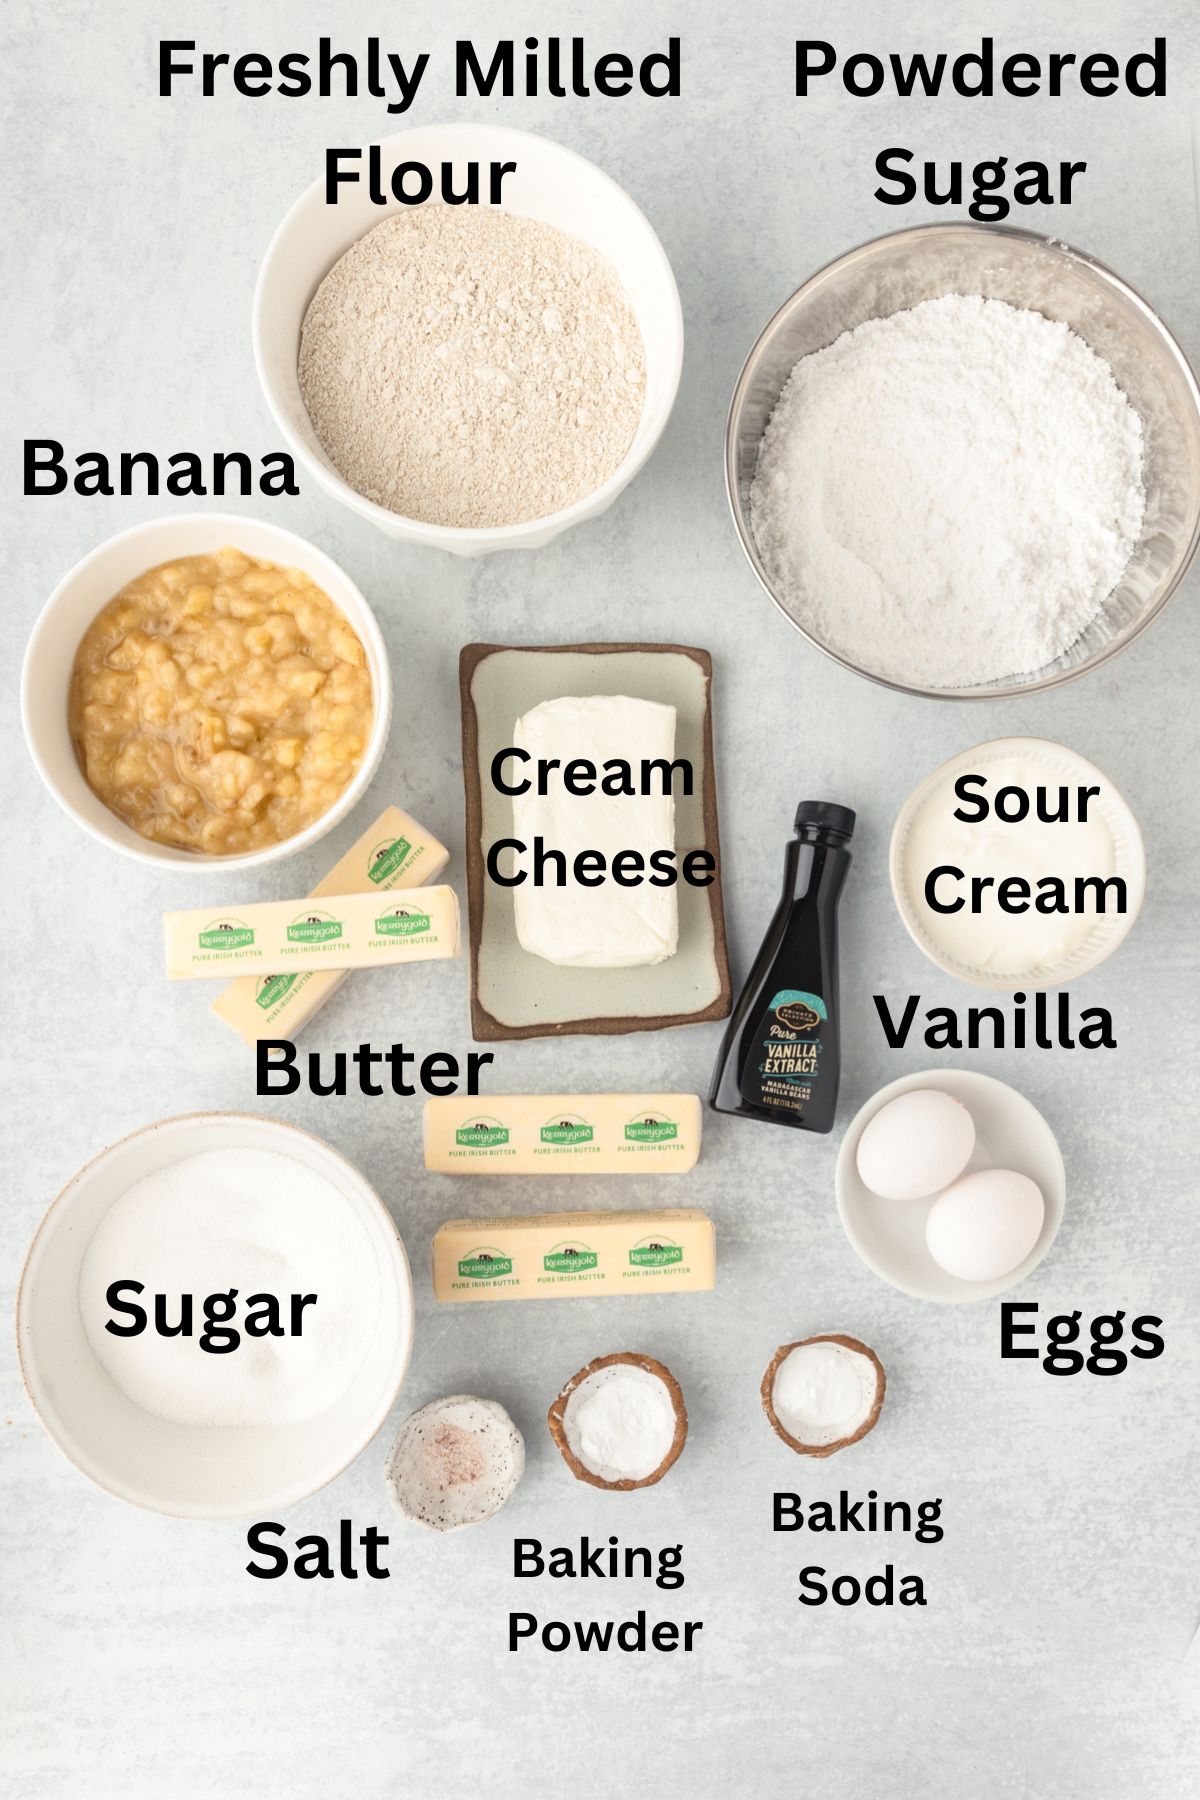 List of ingredients for Banana Cake.